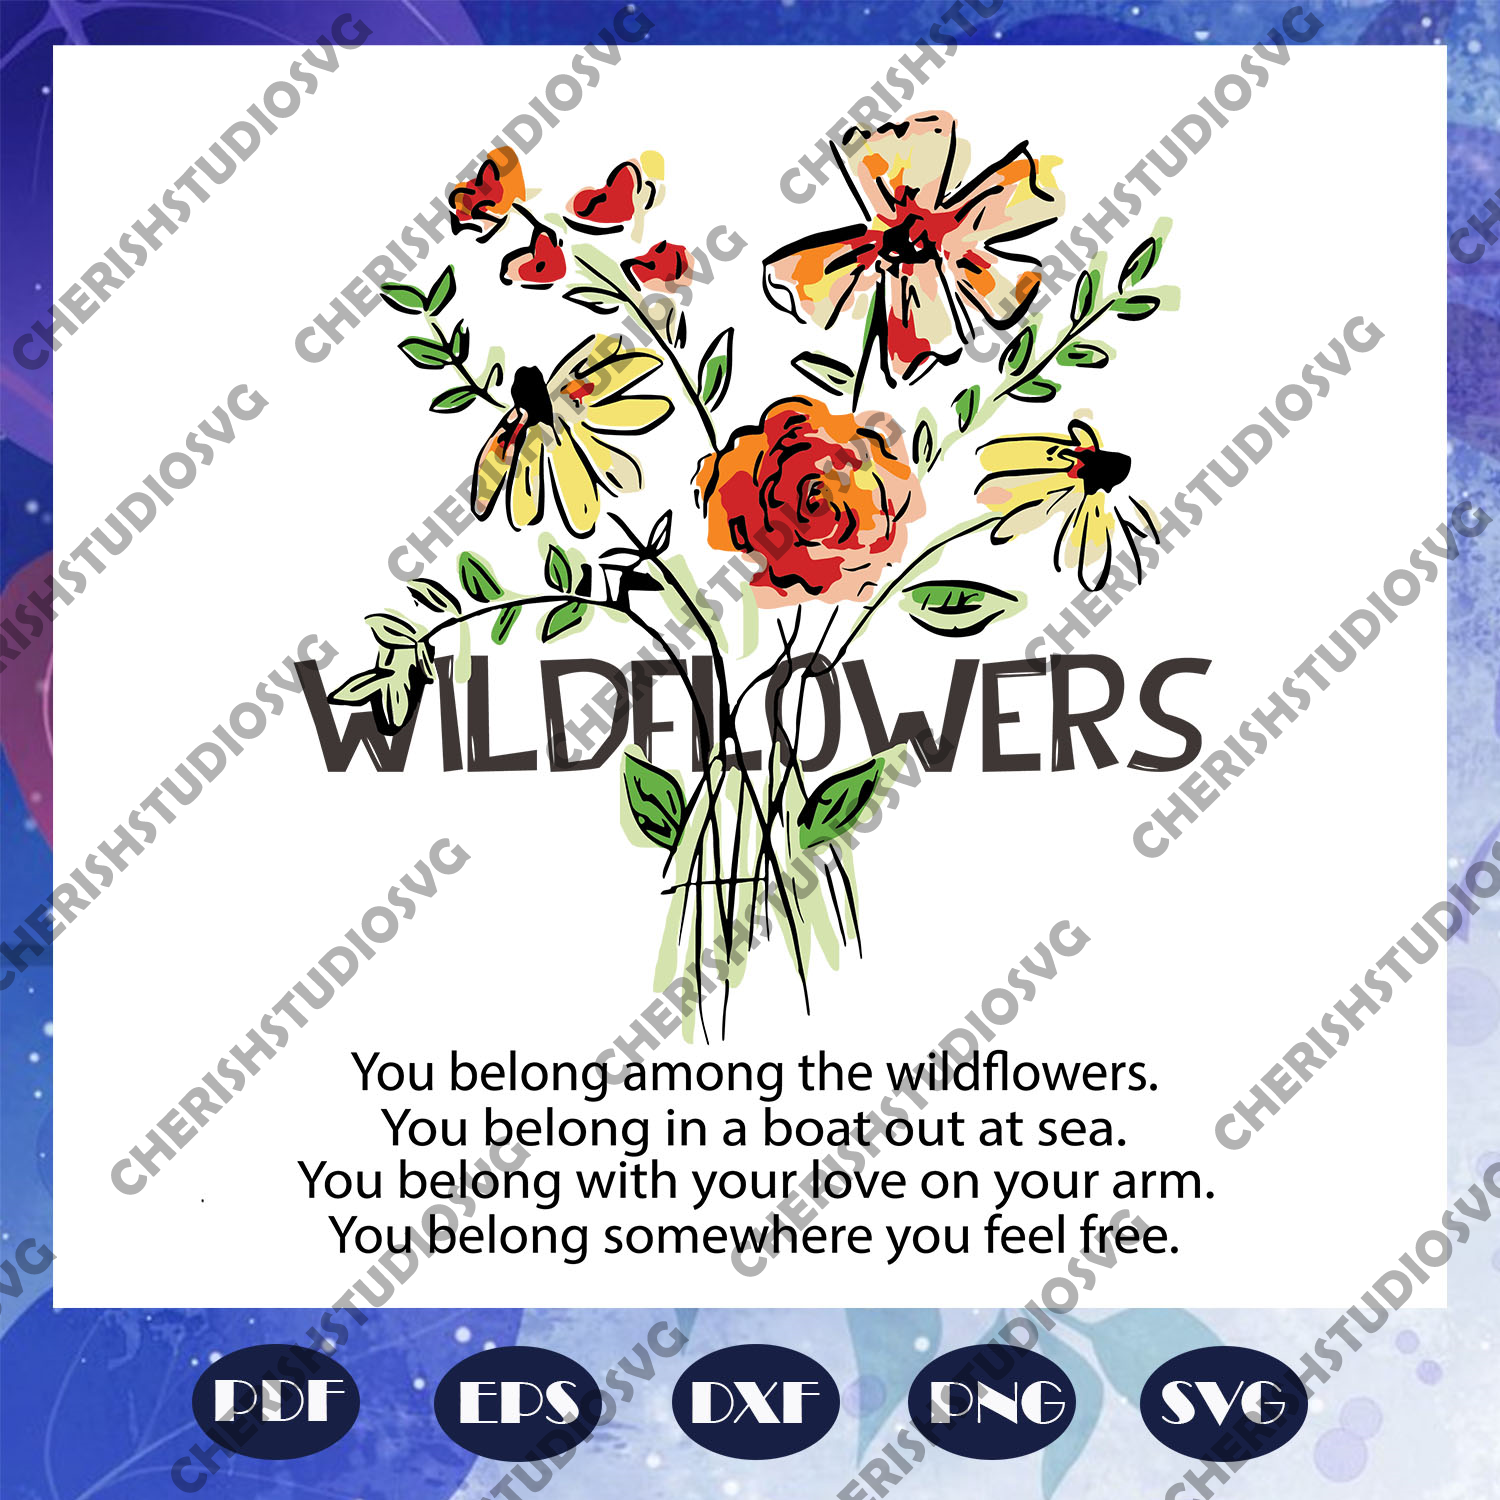 Download Wildflowers Svg You Belong Among The Wildflowers Svg Wildflower Svg Cherishsvgstudio